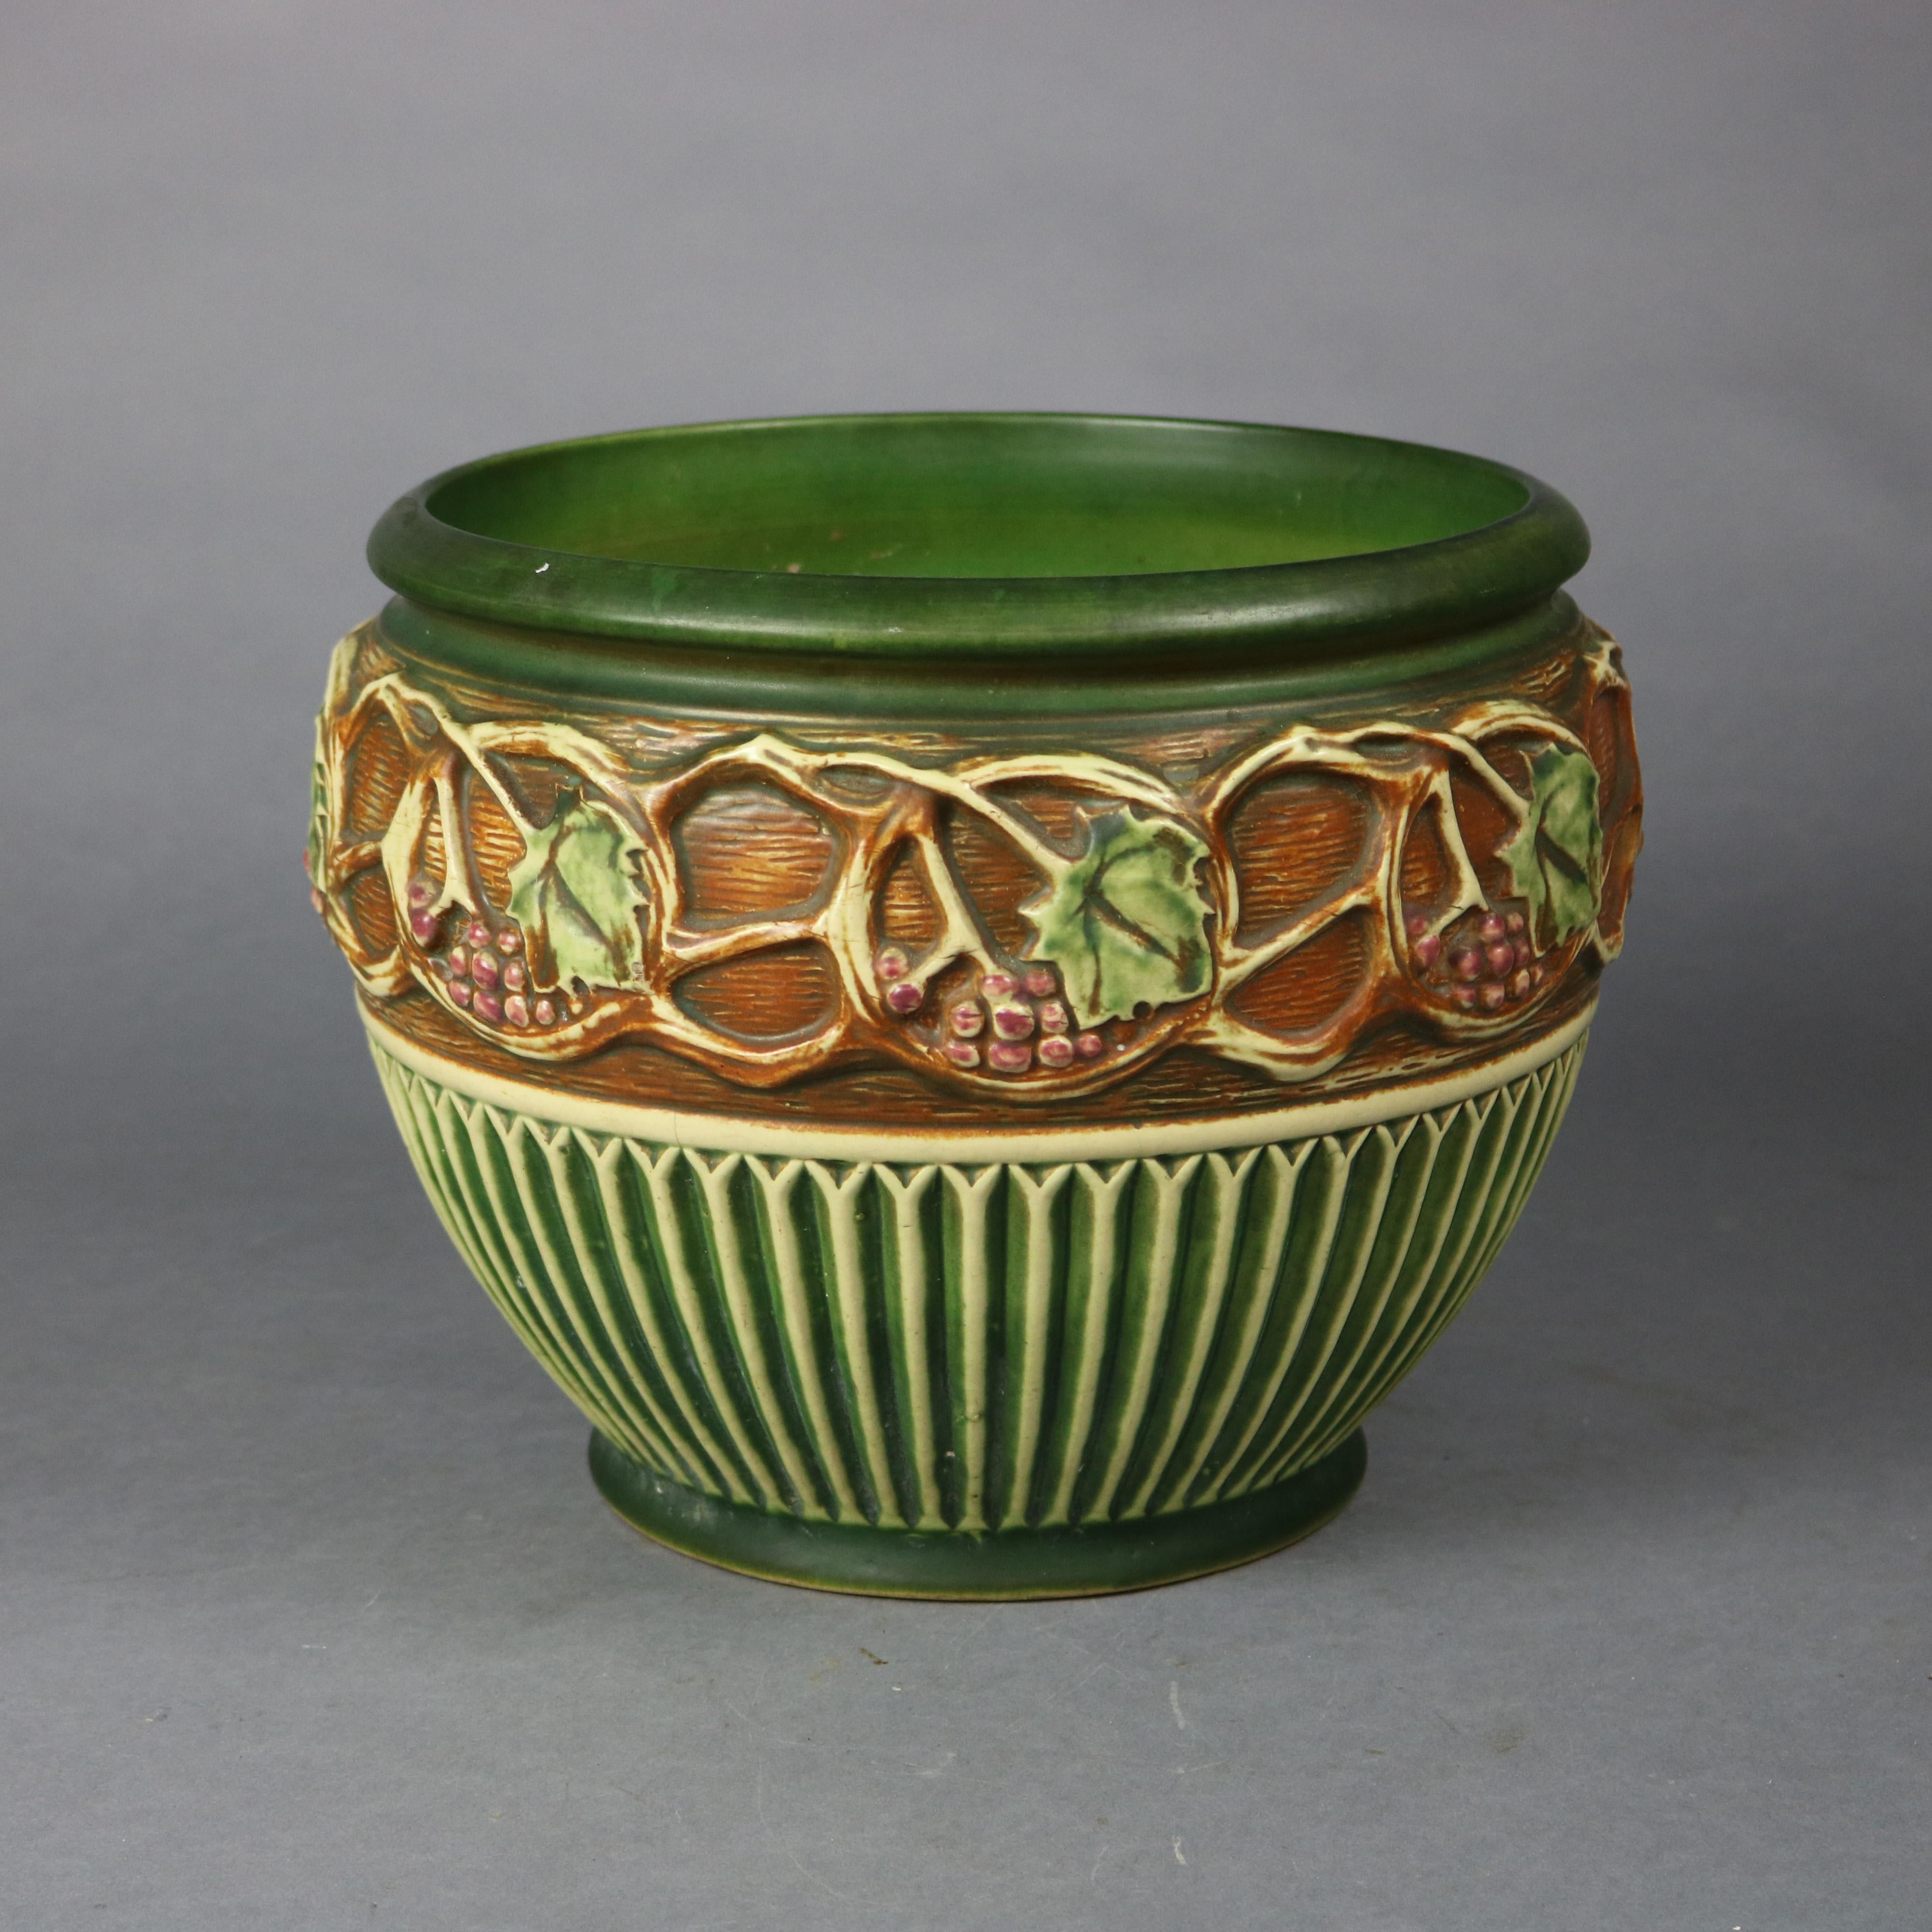 An antique jardiniere by Roseville offers art pottery construction in Normandy pattern with grape and leaf band, maker mark on base as photographed, c1930

Measures - 9.75'' height x 12'' diameter, 9''diam opening.